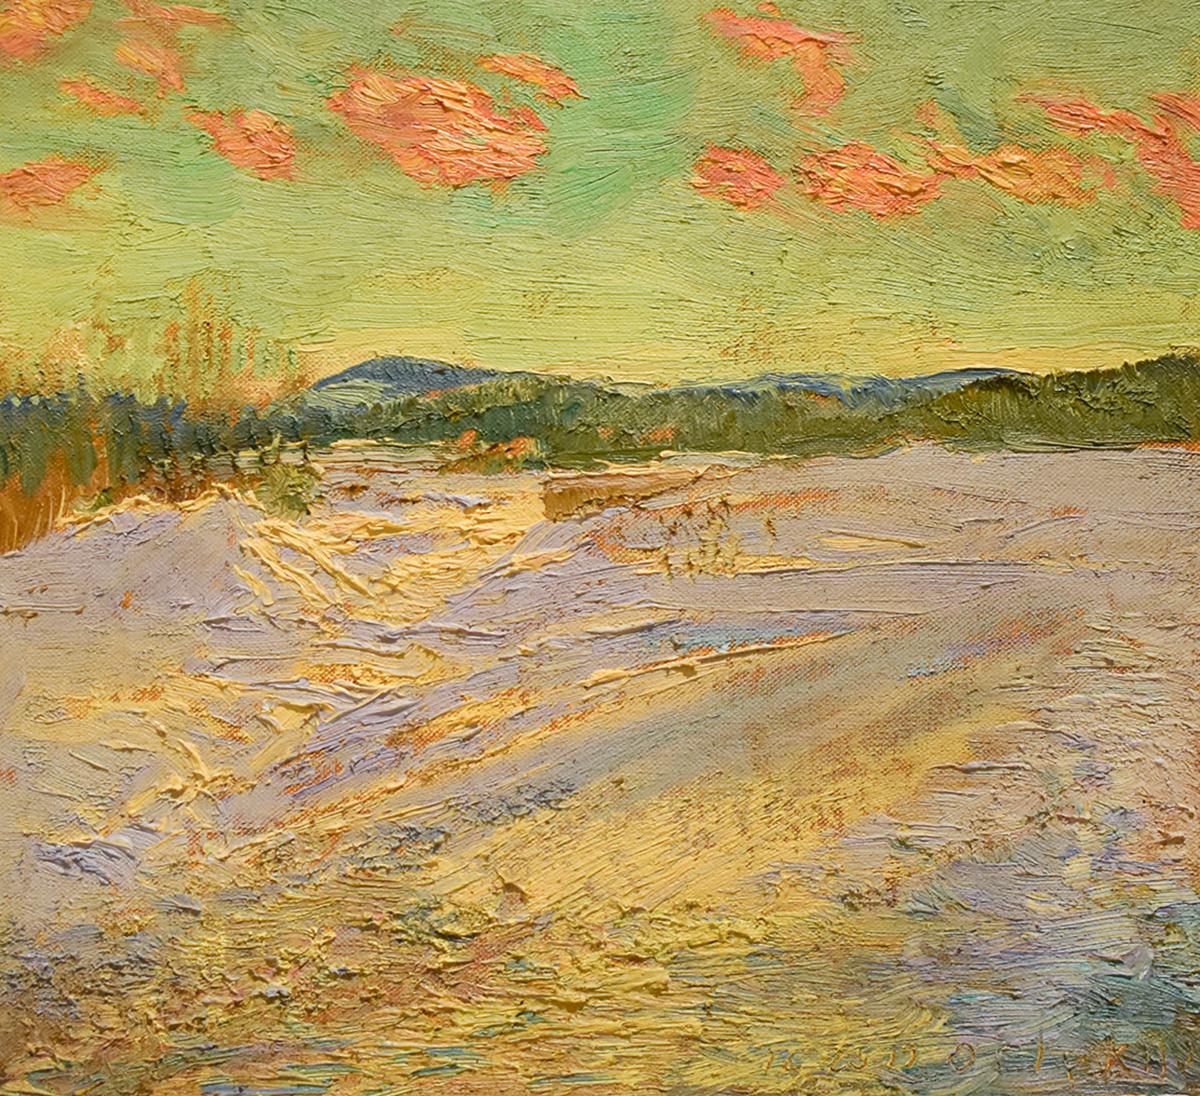 Impressionistic, en plein air landscape painting on linen of a winter sunset and snowy field
#5543 Hank's Road, Searching for the Site of Christmas, 2018
oil on linen mounted on homasote board
16.5 x 18.5 inches

Harry Orlyk is celebrated for his